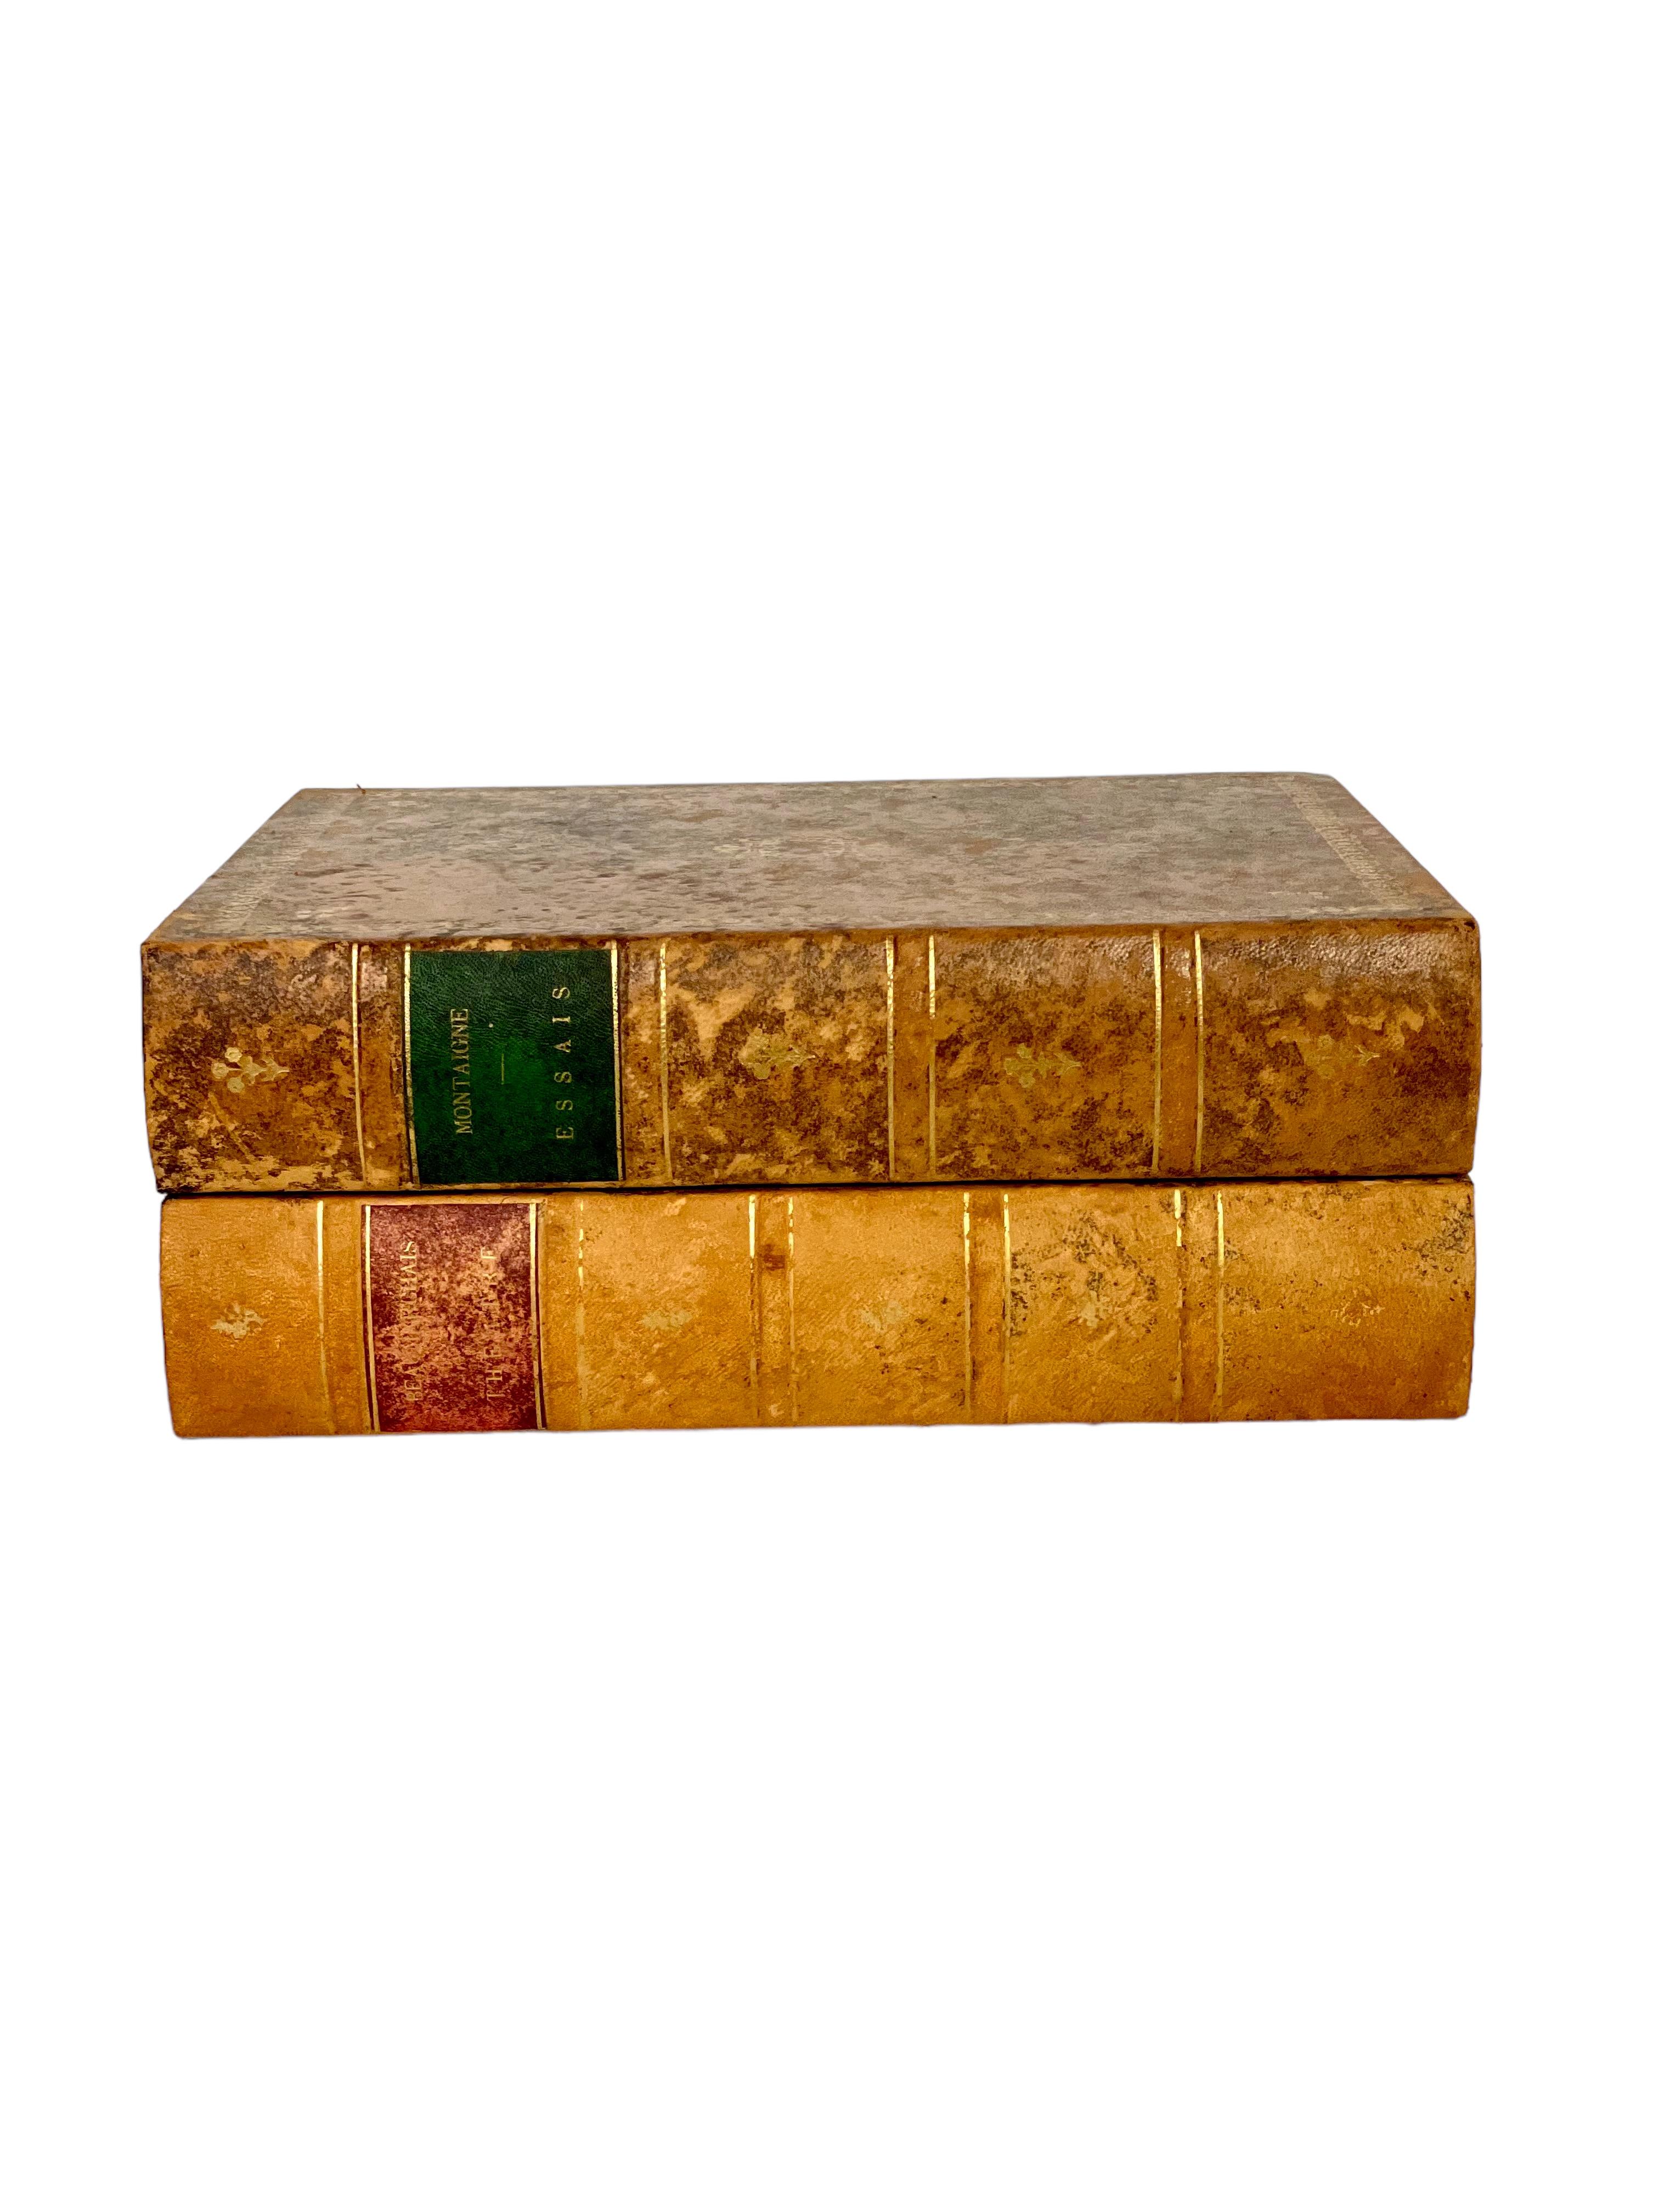 This fabulous novelty leather faux-book hinged case has been ingeniously designed to secretly hide six adorable animal-themed whisky crystal tumblers. Beautifully crafted from two gilt-tooled antique leather 'books' entitled 'Beaumarchais Théâtre'